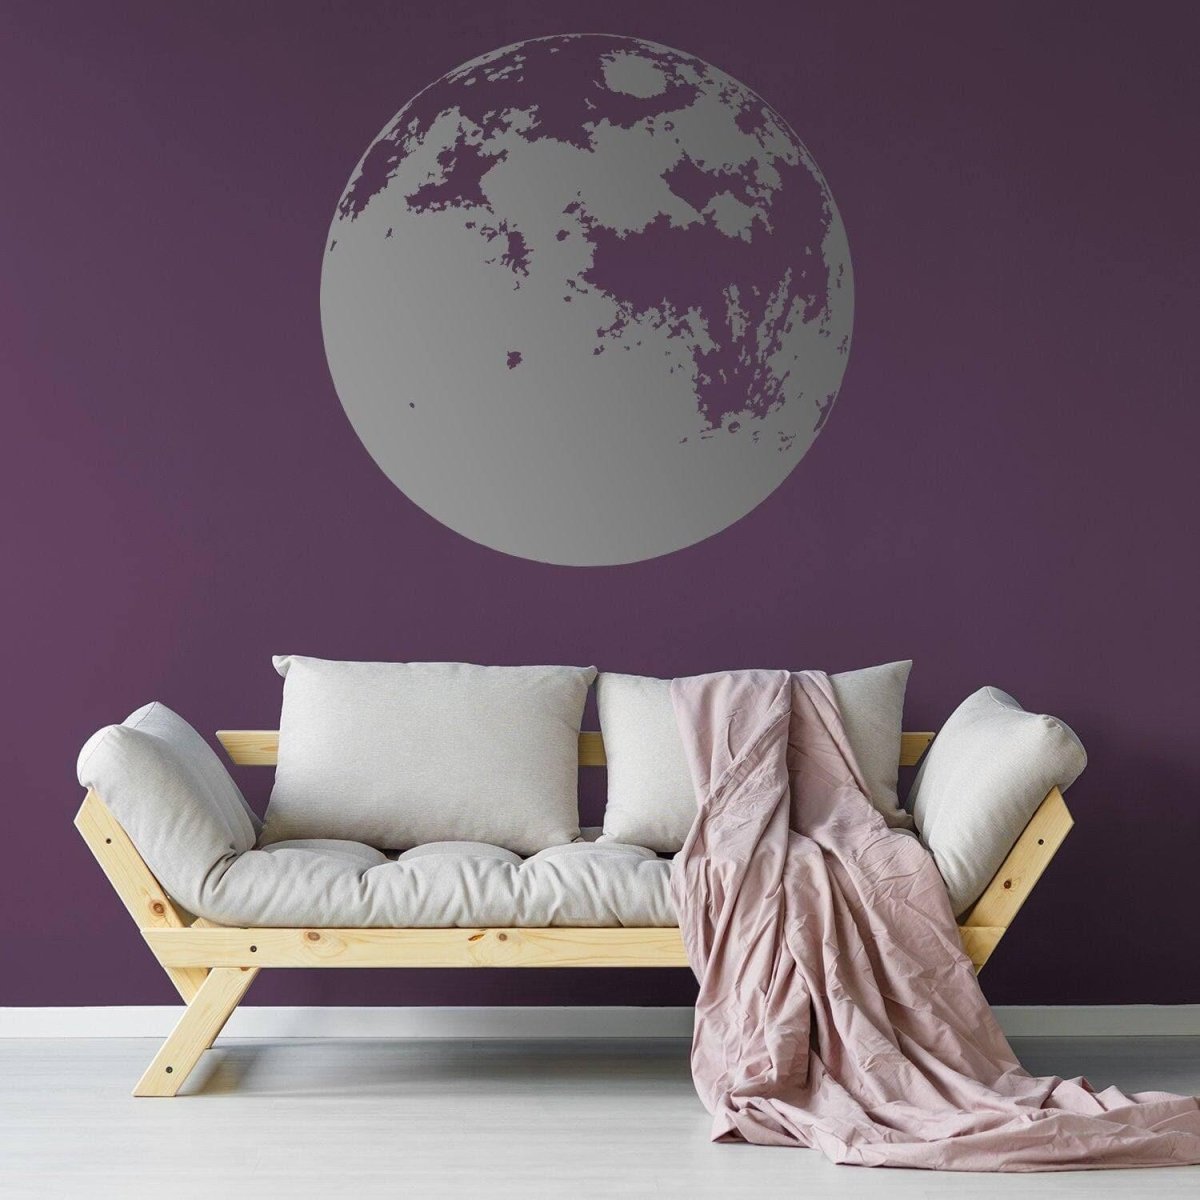 Celestial Wonder: Captivating Moon Phase Wall Decor Decal - Decords